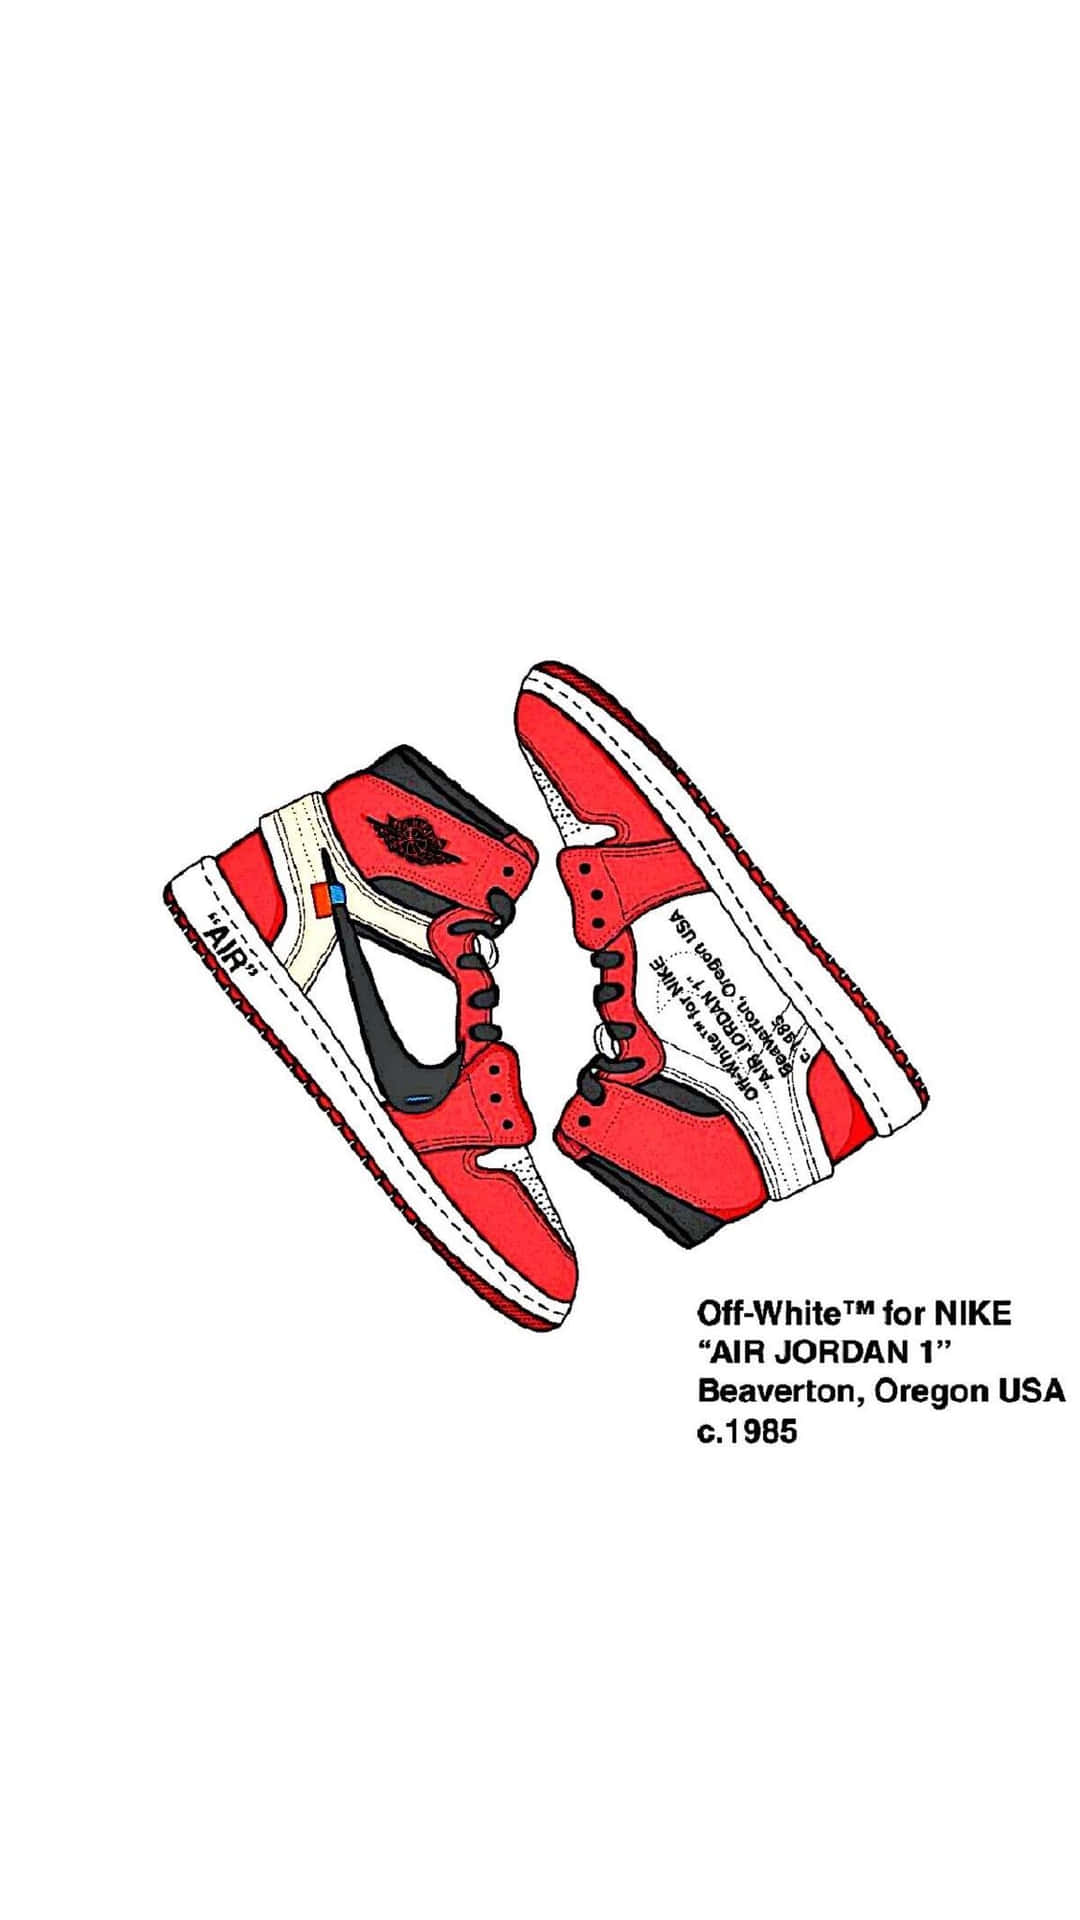 A Pair Of Air Jordan 1 Sneakers With A Red And White Design Wallpaper